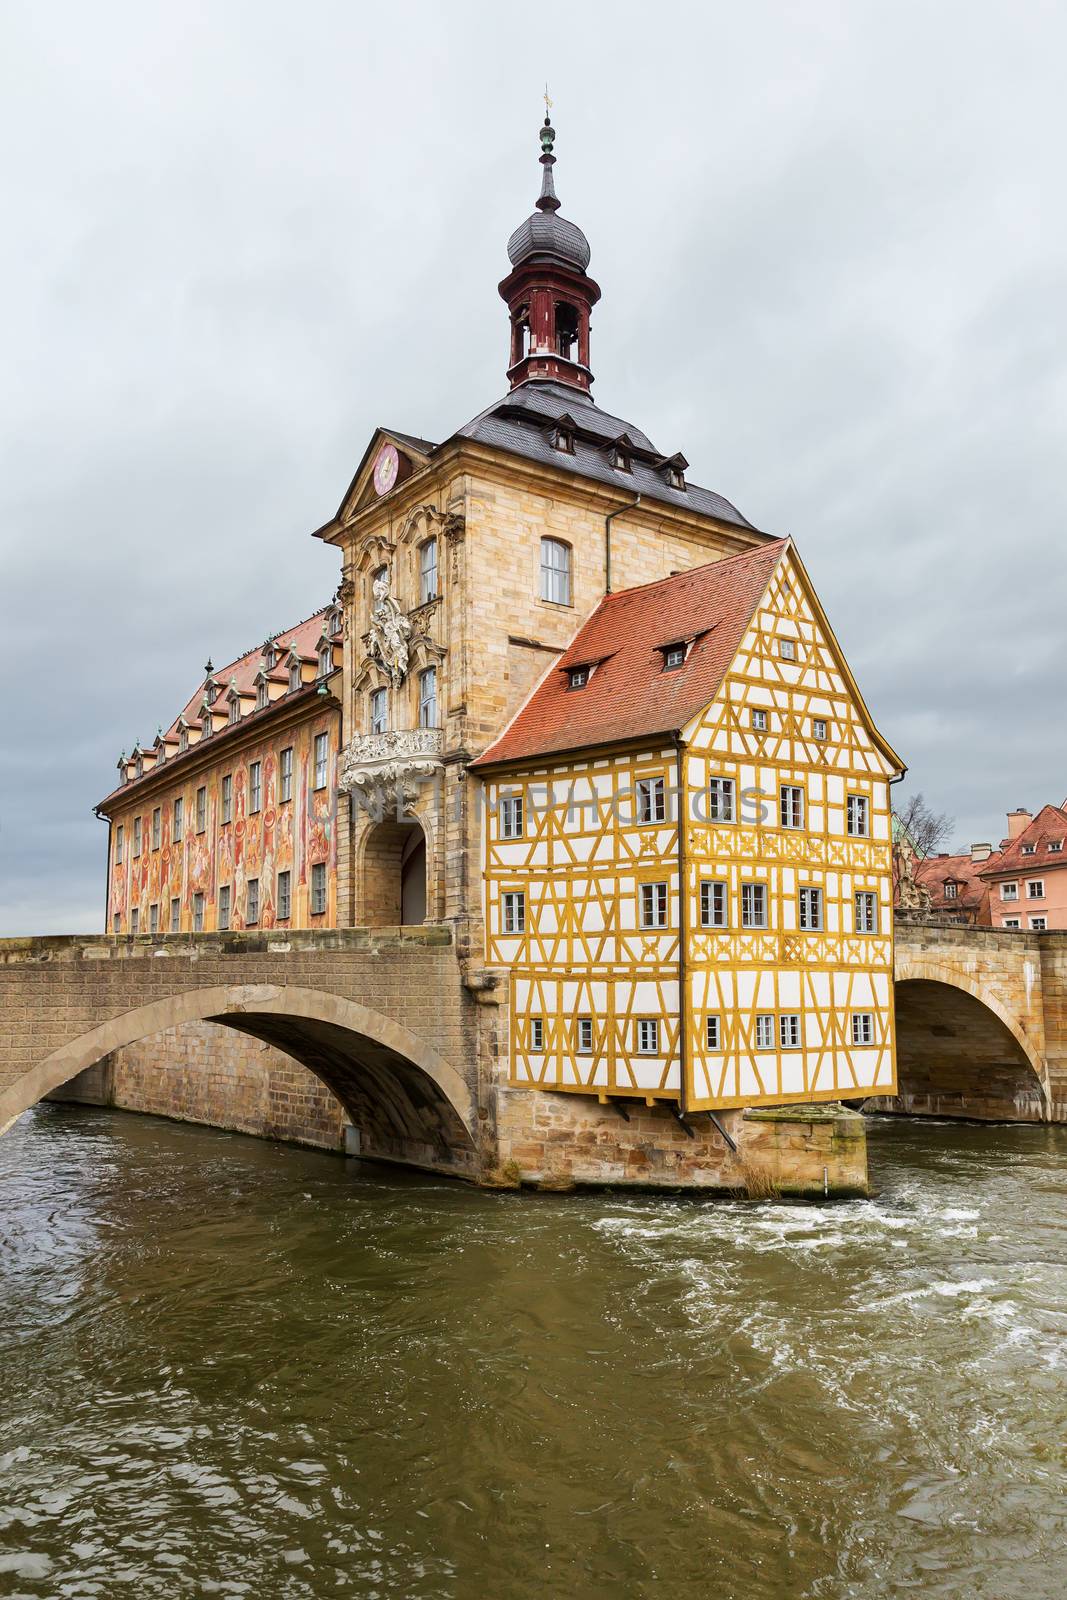 Altes Rathaus or Old Town Halll in Bamberg, Germany by Brigida_Soriano